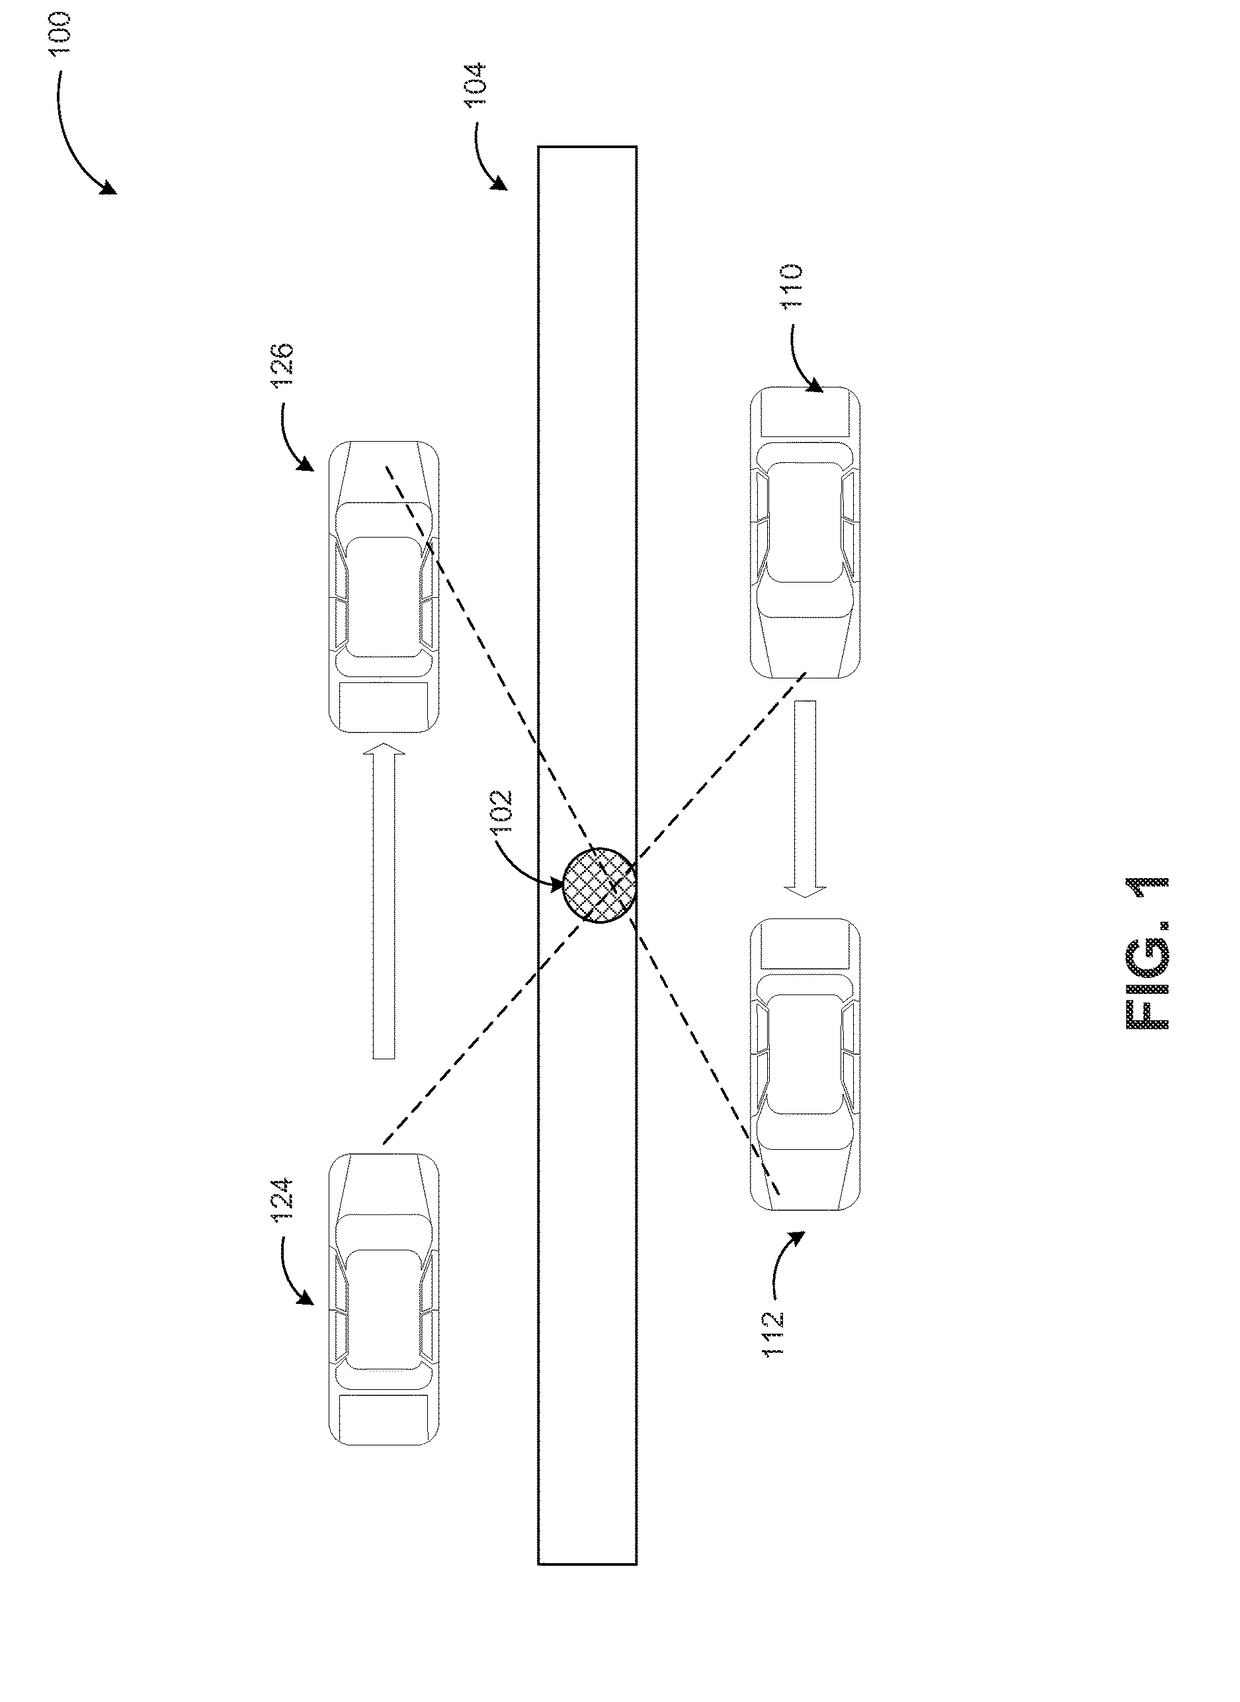 Roadway infrastructure monitoring based on aggregated mobile vehicle communication parameters